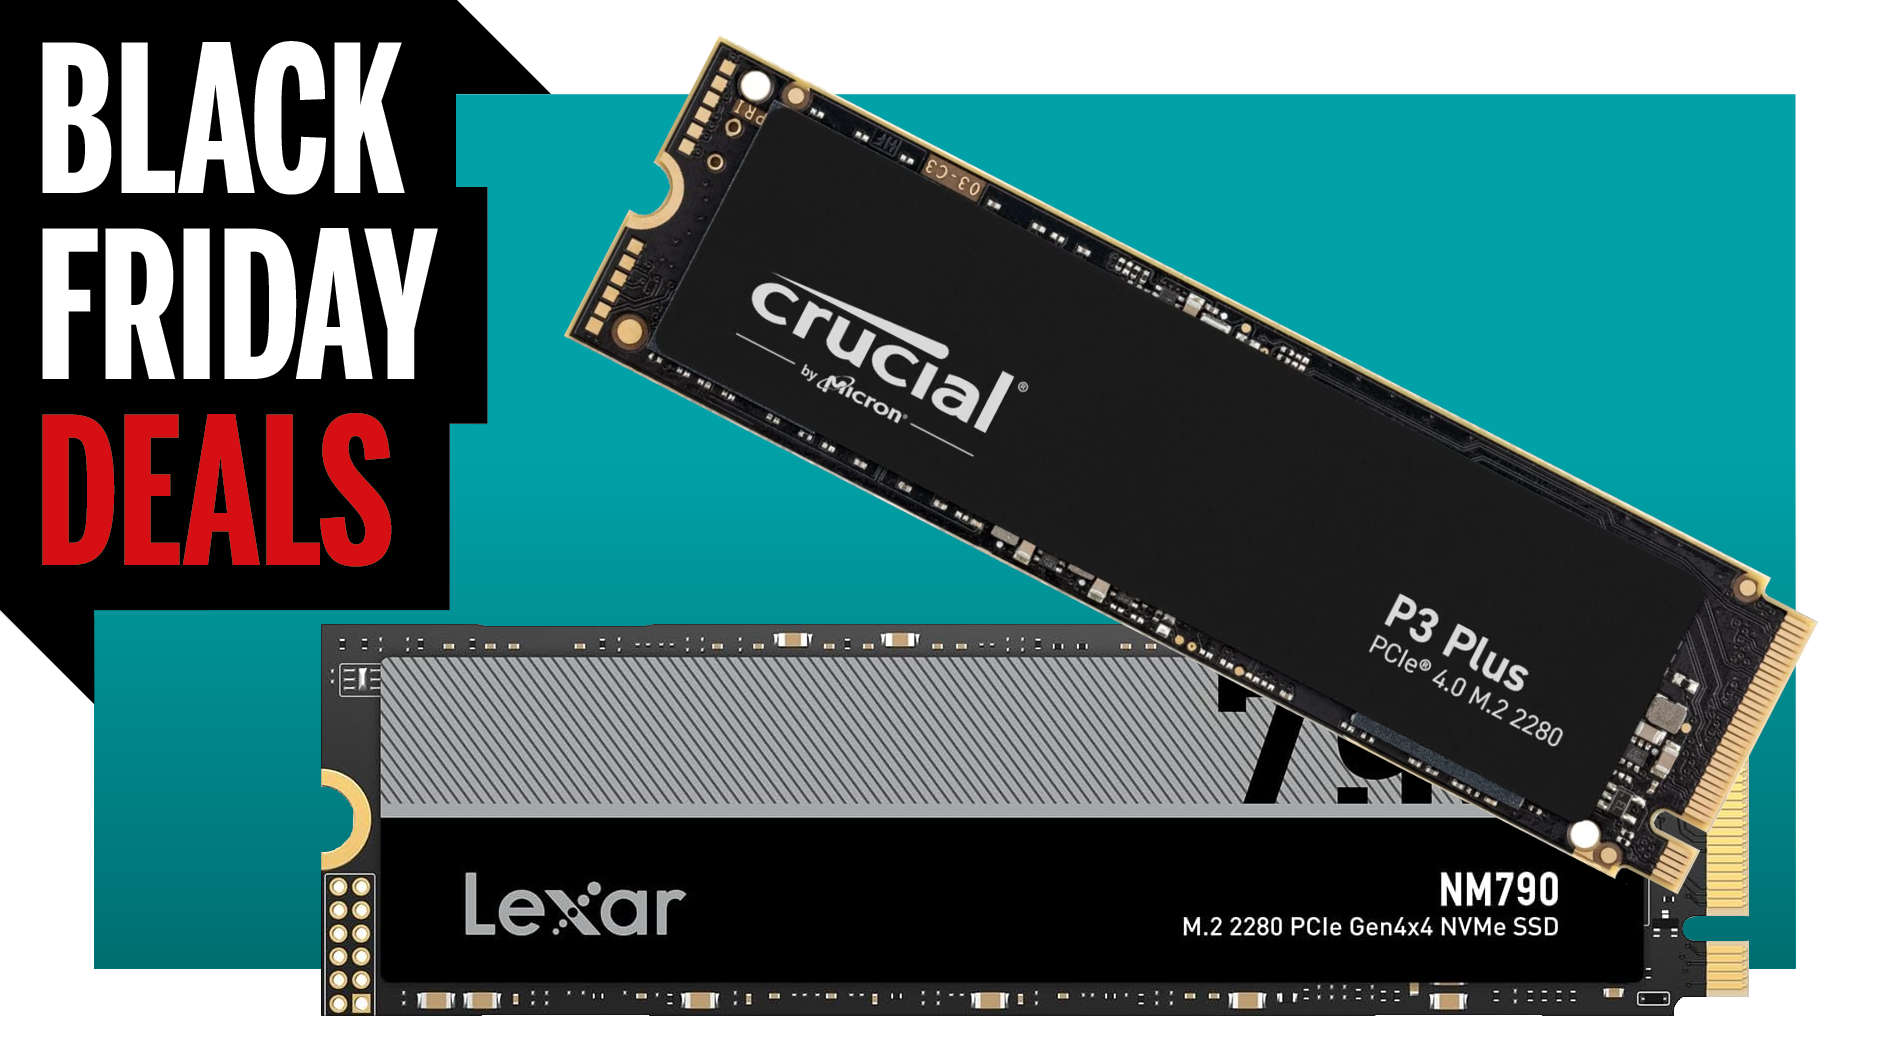 The Best SSD For Gaming and Laptops for Value - Crucial P3 Plus